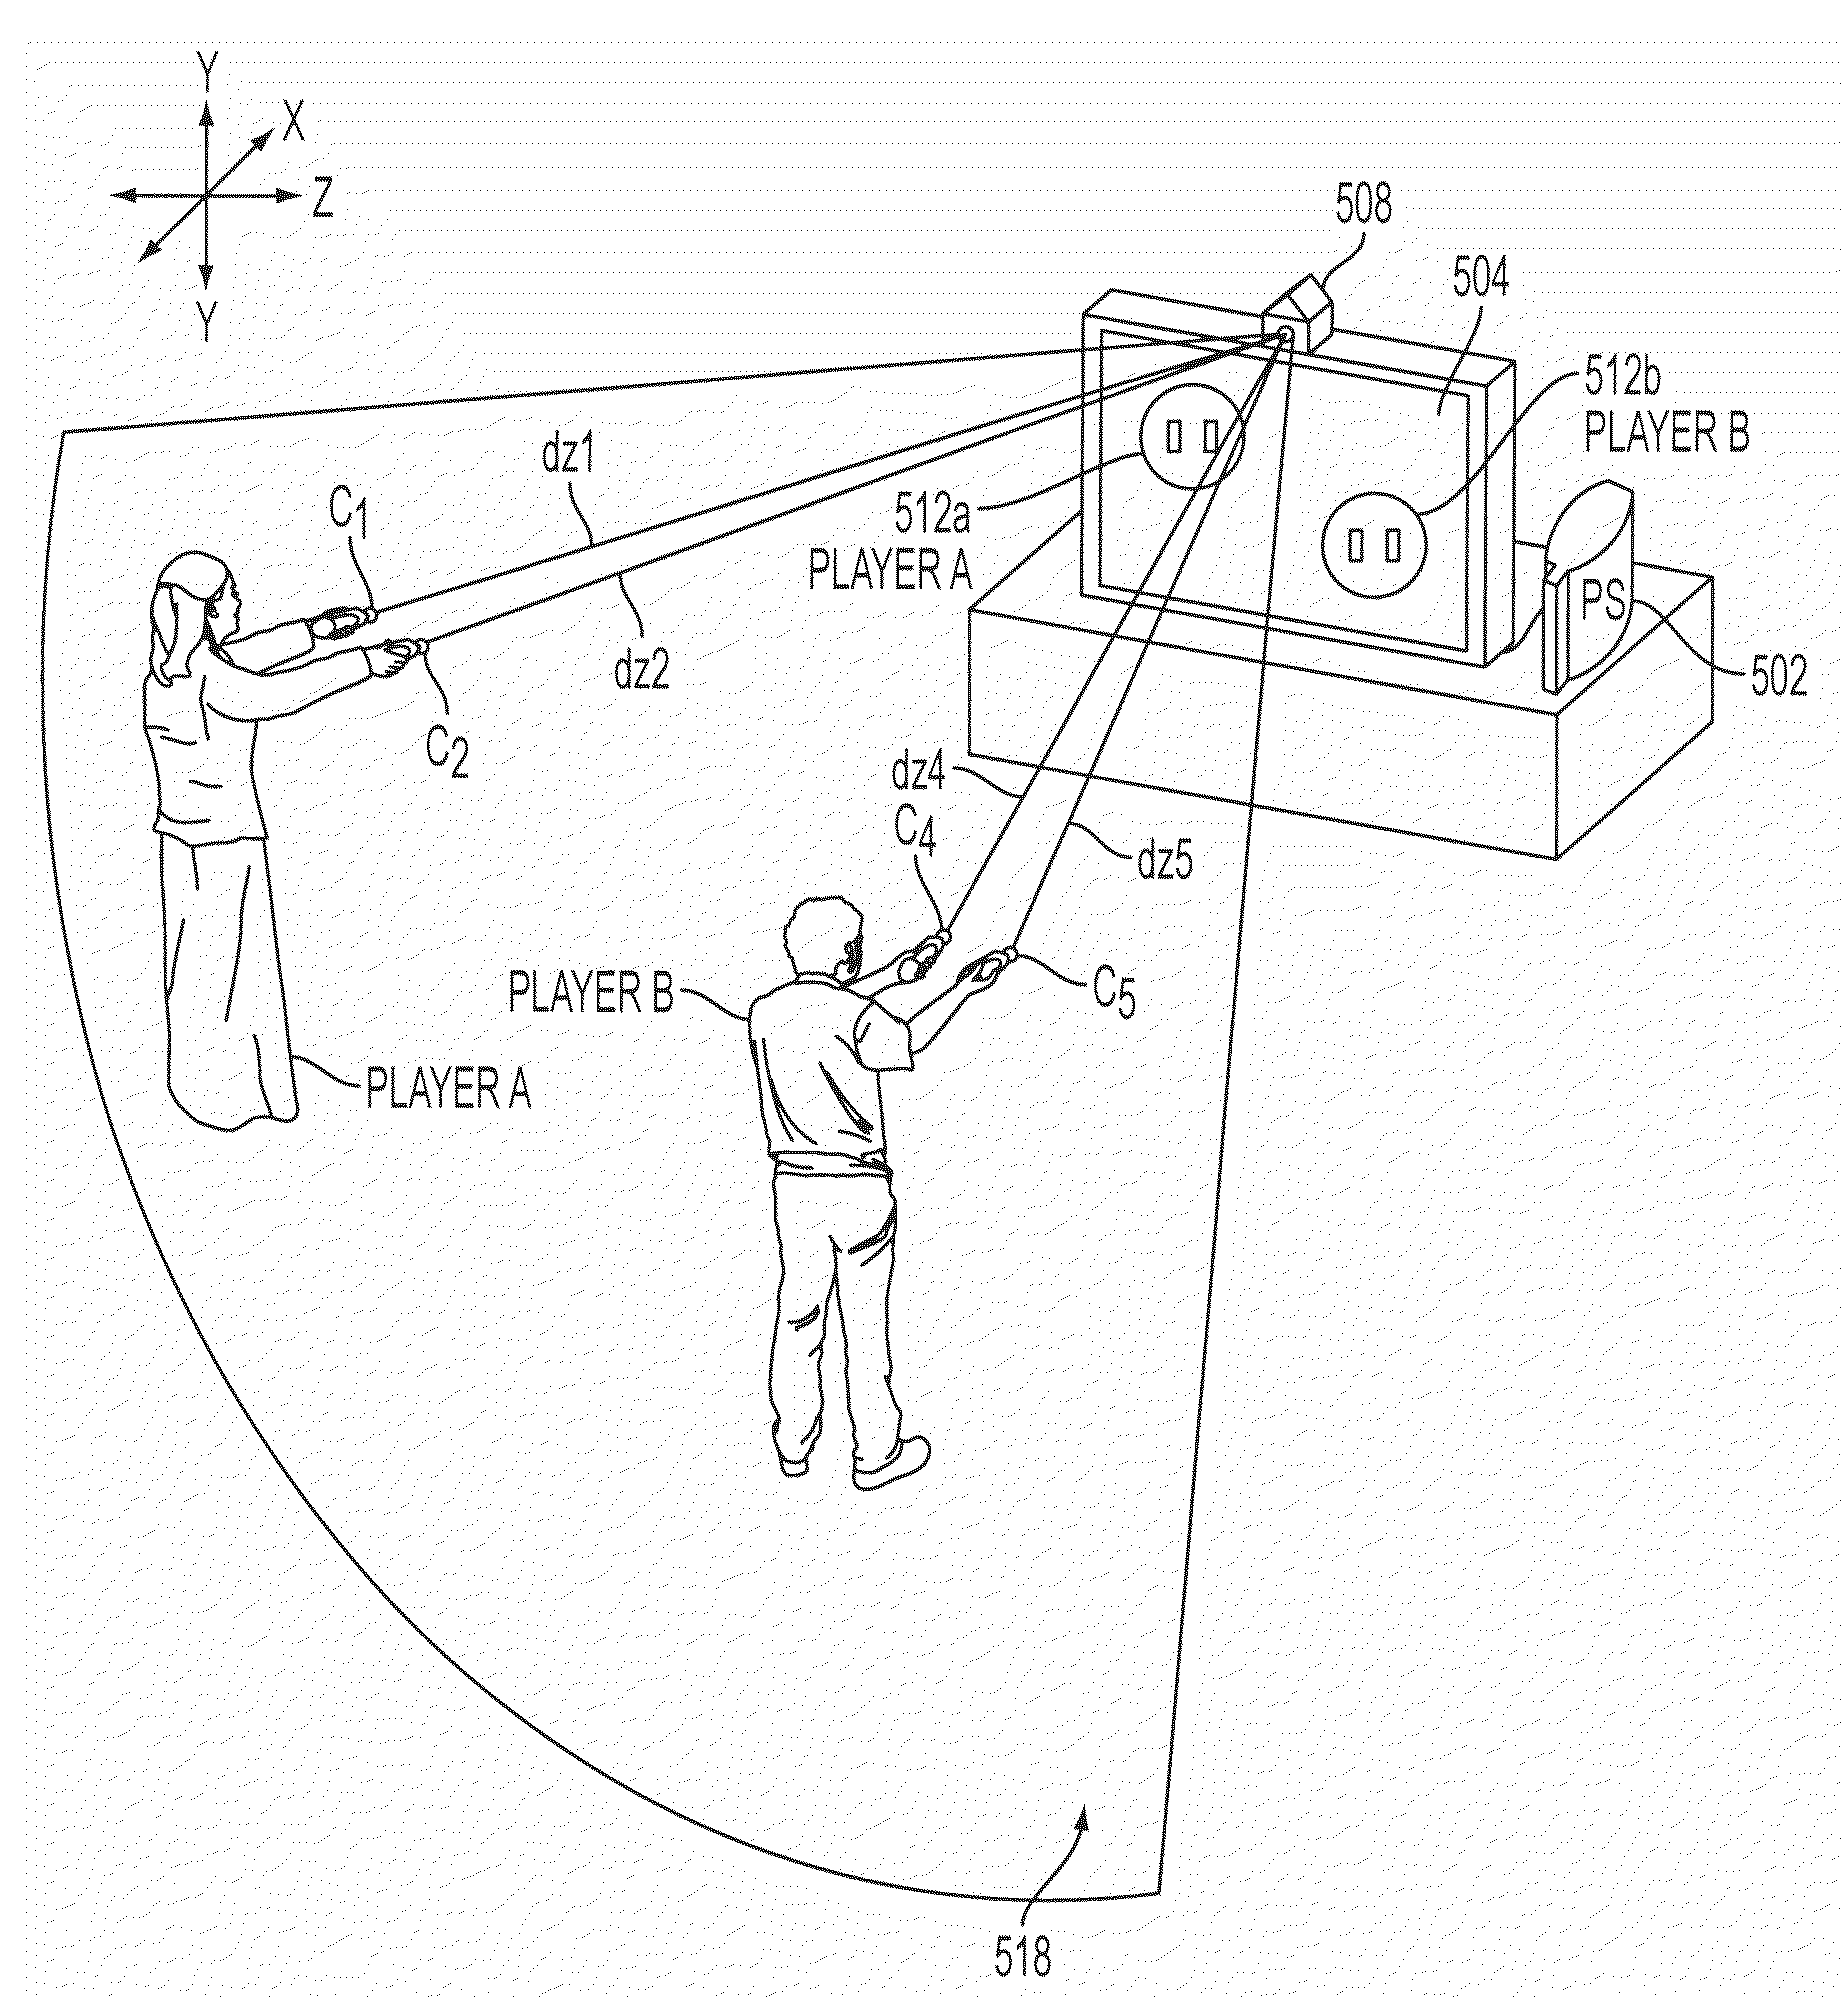 Determining location and movement of ball-attached controller